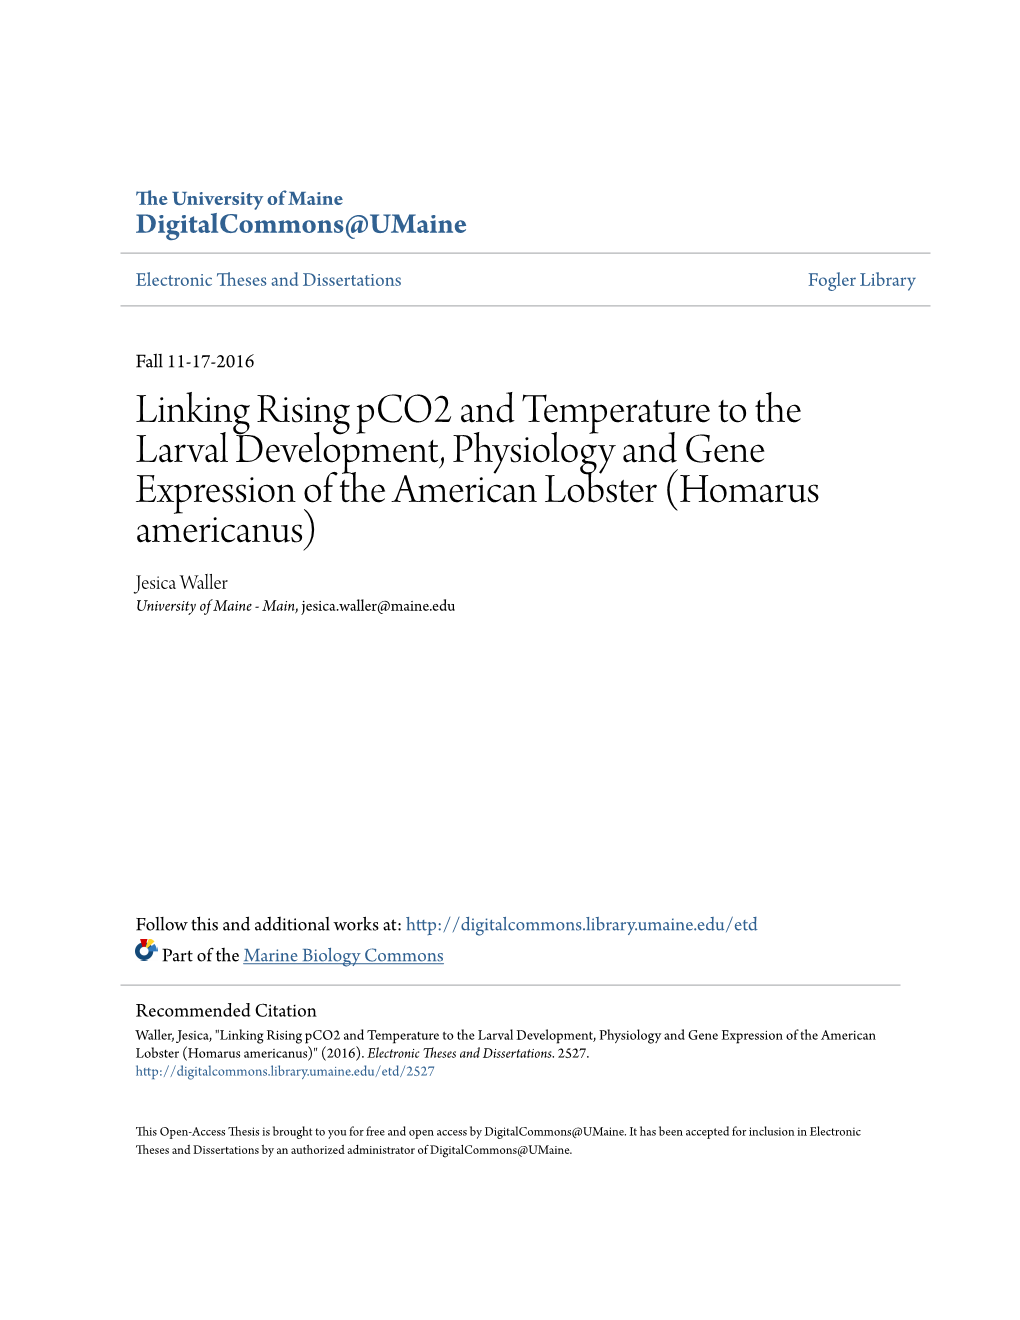 Linking Rising Pco2 and Temperature to the Larval